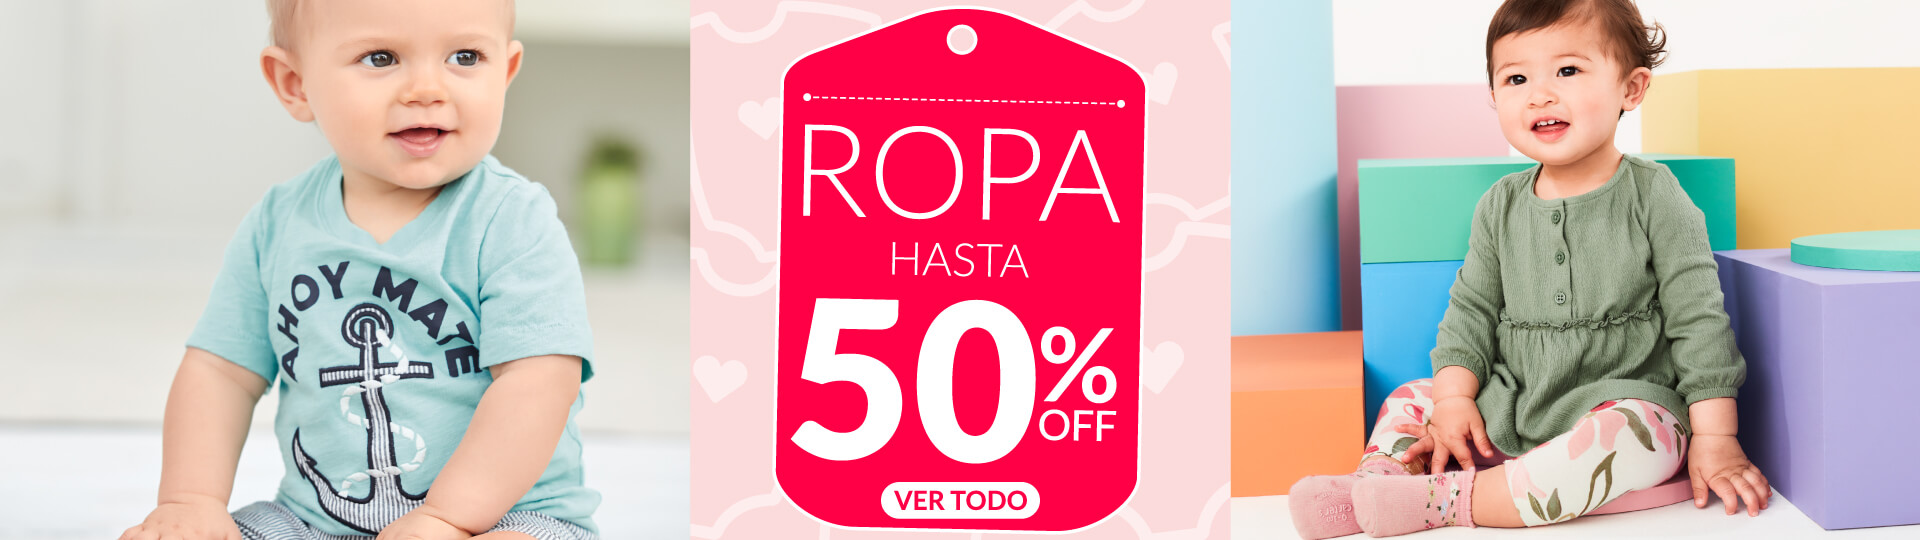 ropa 